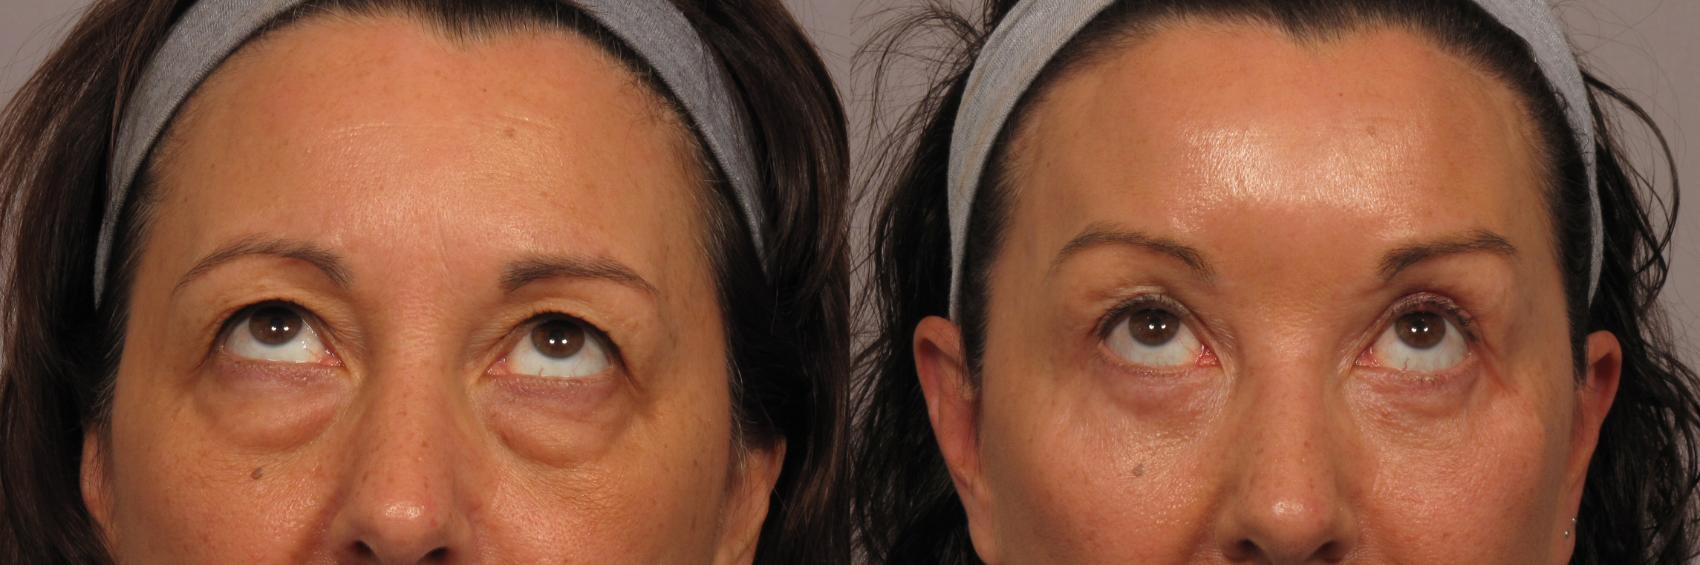 Front View of Eye and Brow Lift with Patient looking up